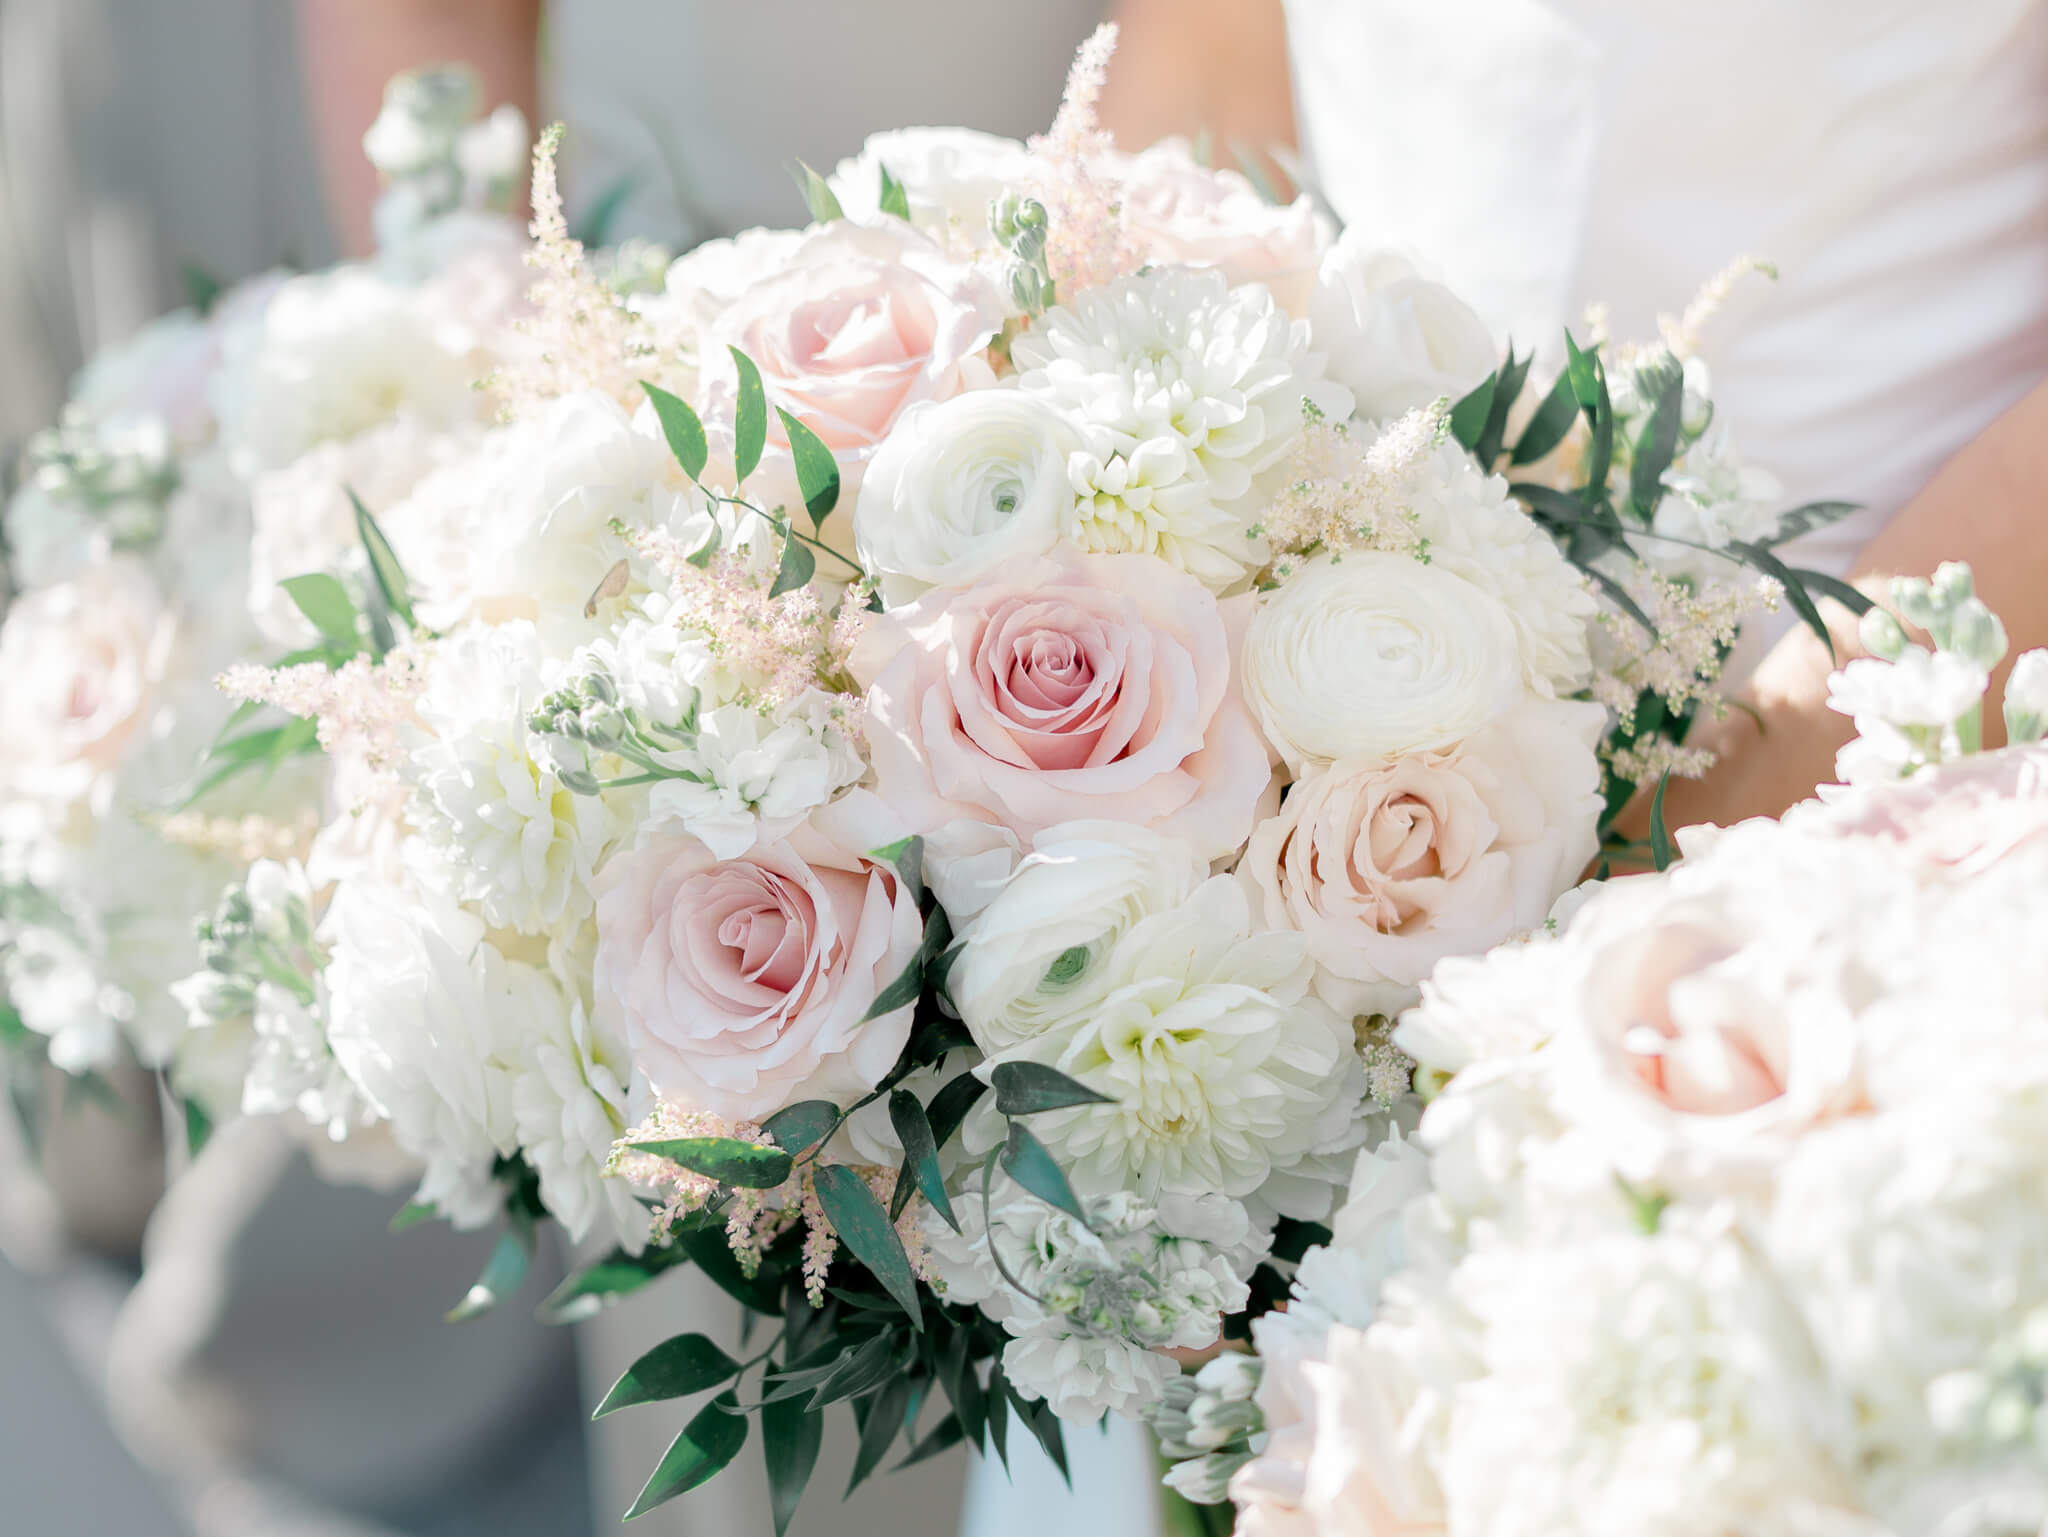 Close-up image of blush, white, cream and green bouquets held by the bride and her bridesmaids.